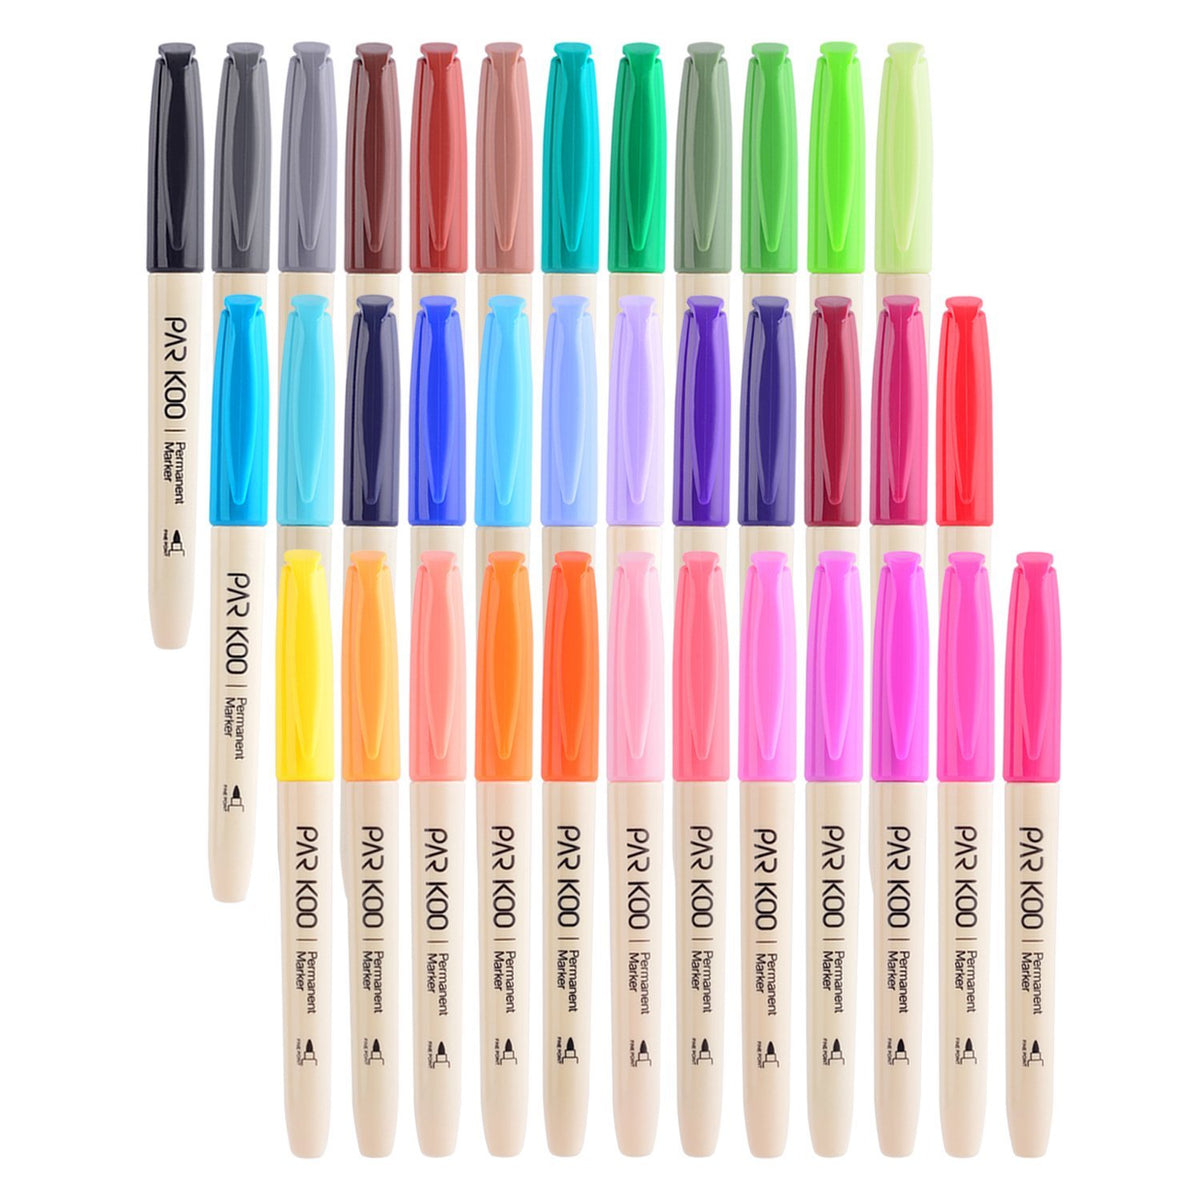 ParKoo 12 Colors Alcohol Brush Markers - ParKoo